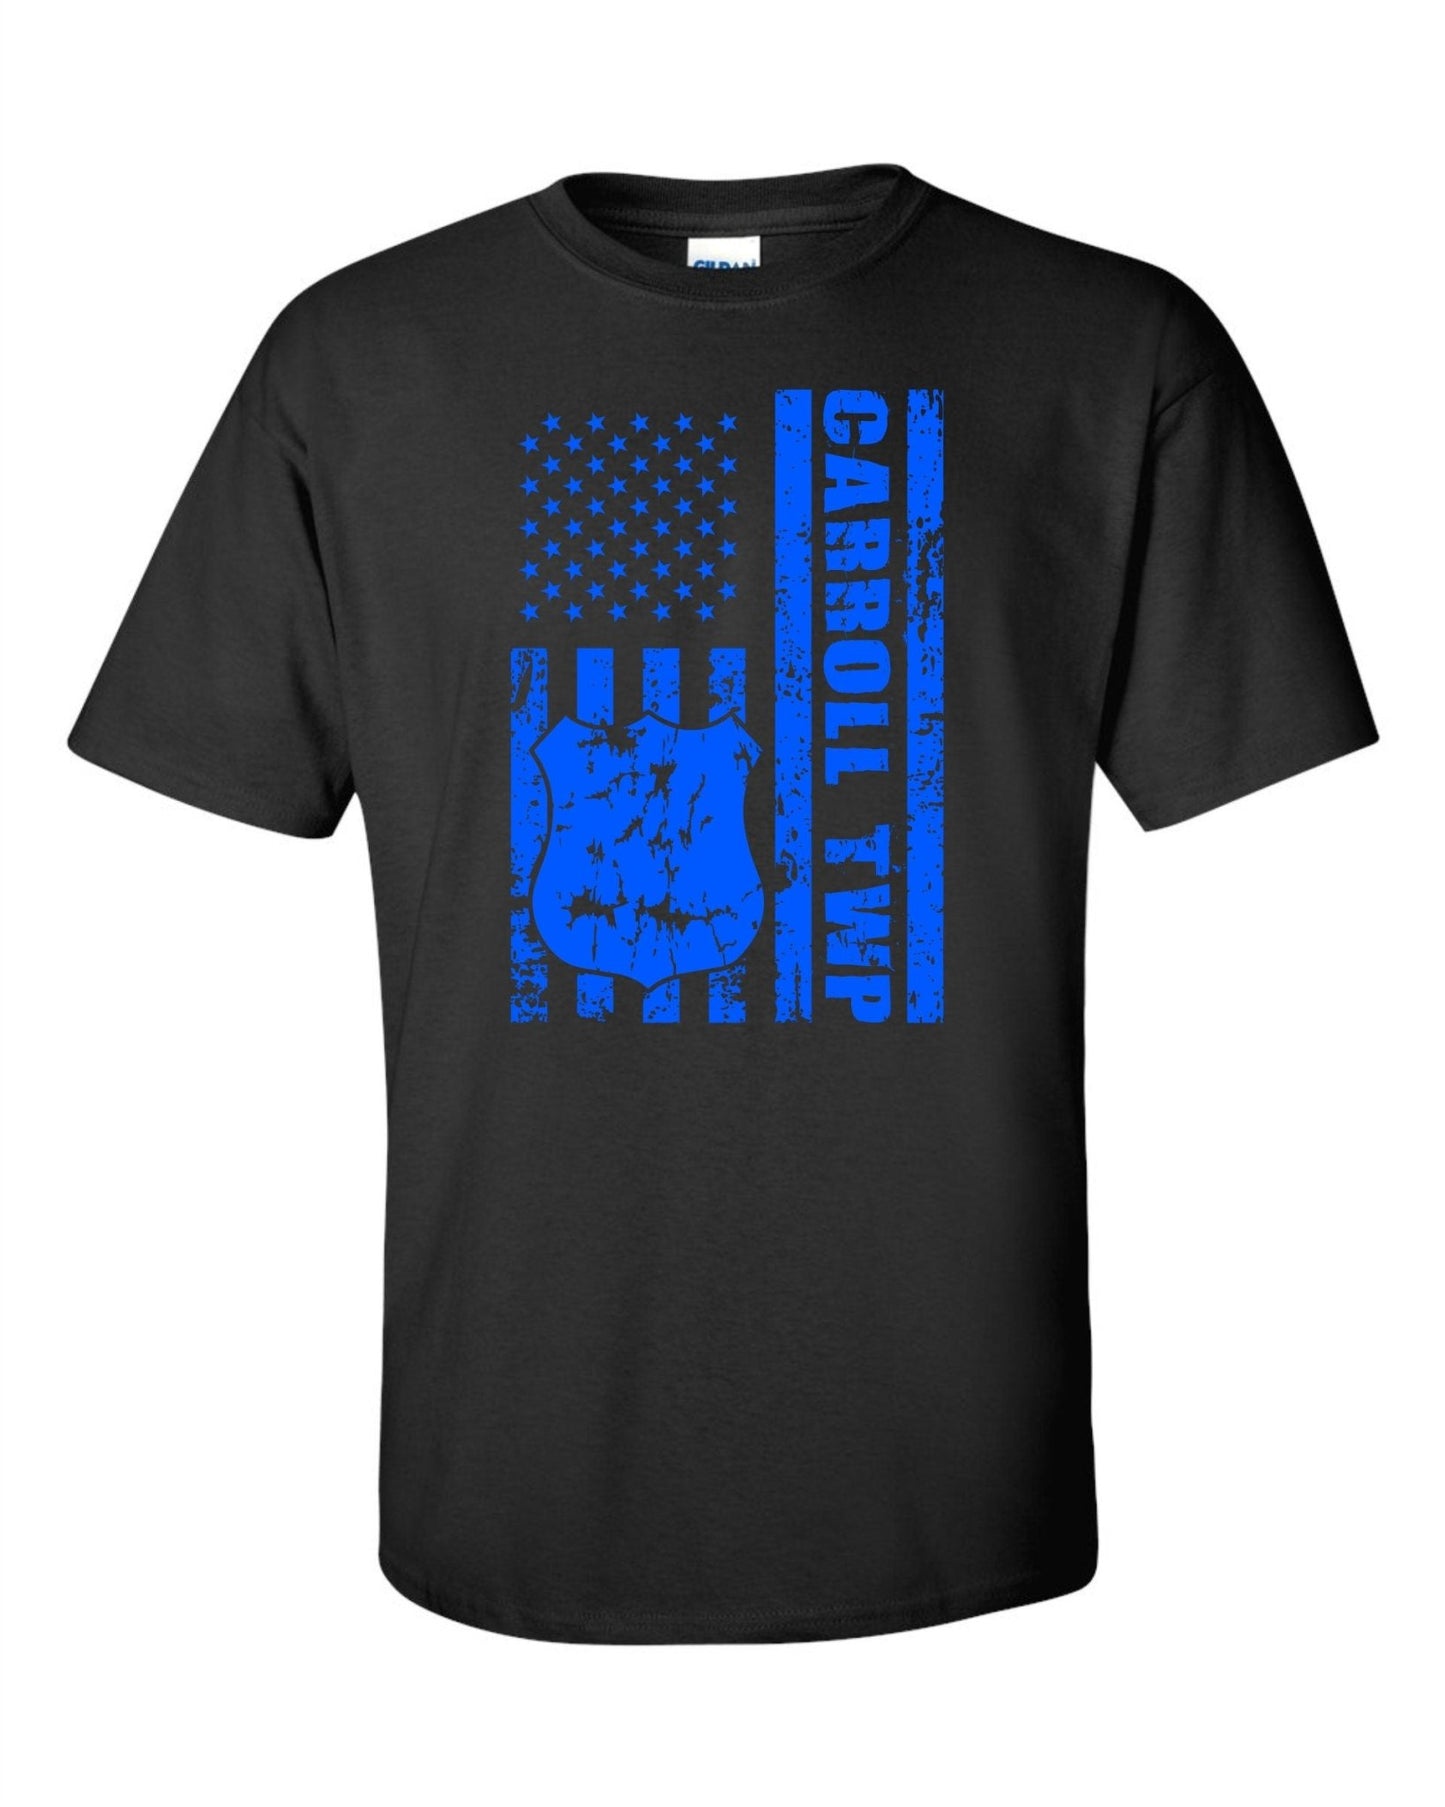 Police T Shirt, Custom Name, Department or Location - SBS T Shop